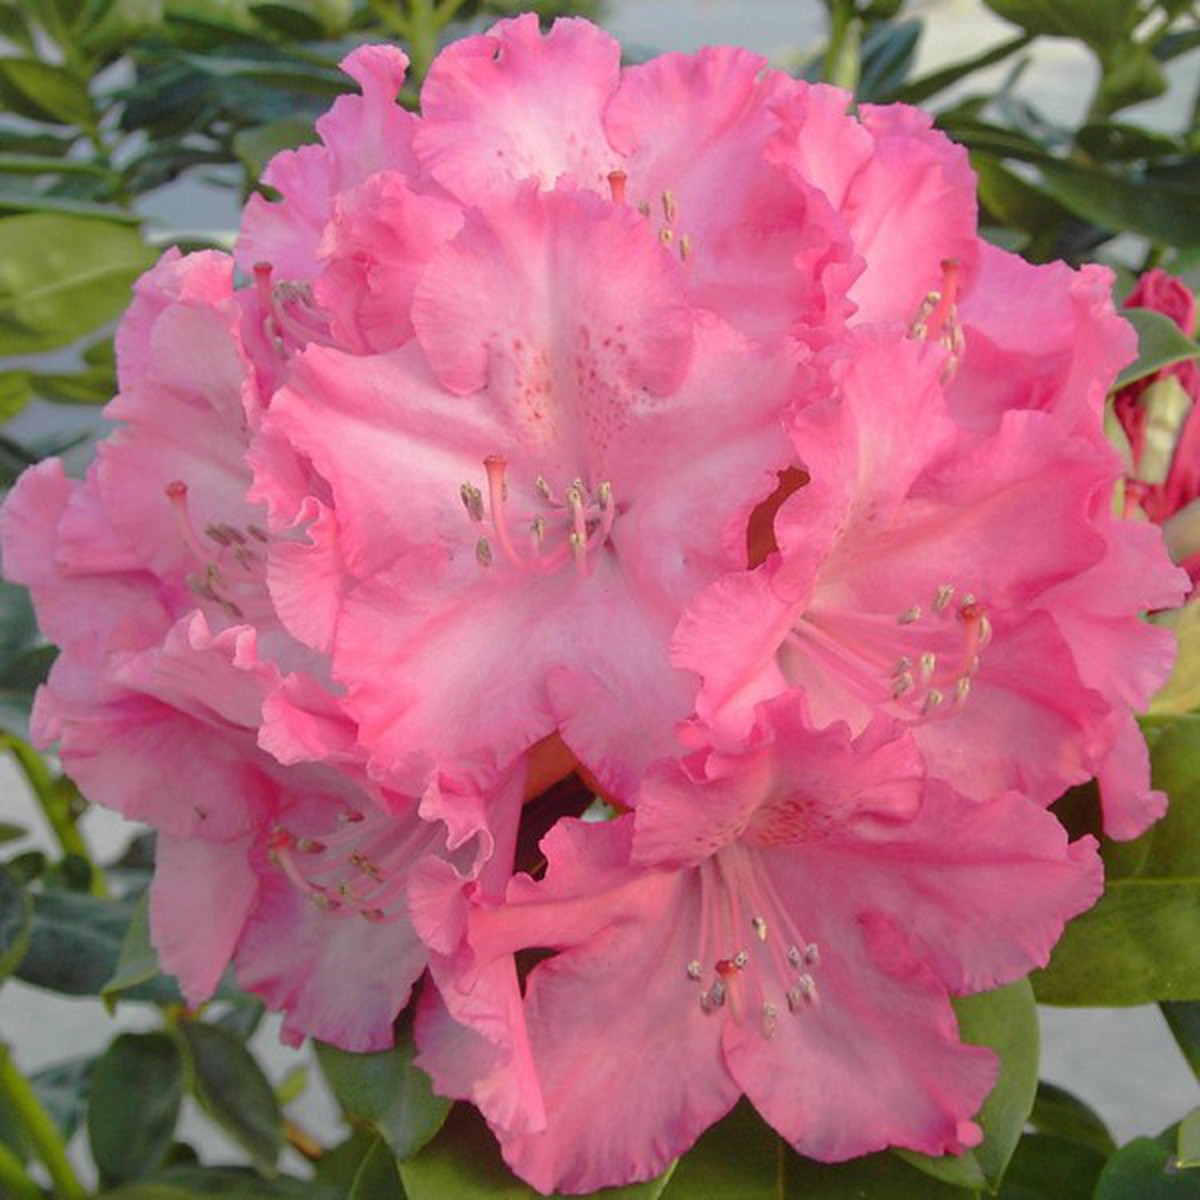   Rhododendron 'Germania'  